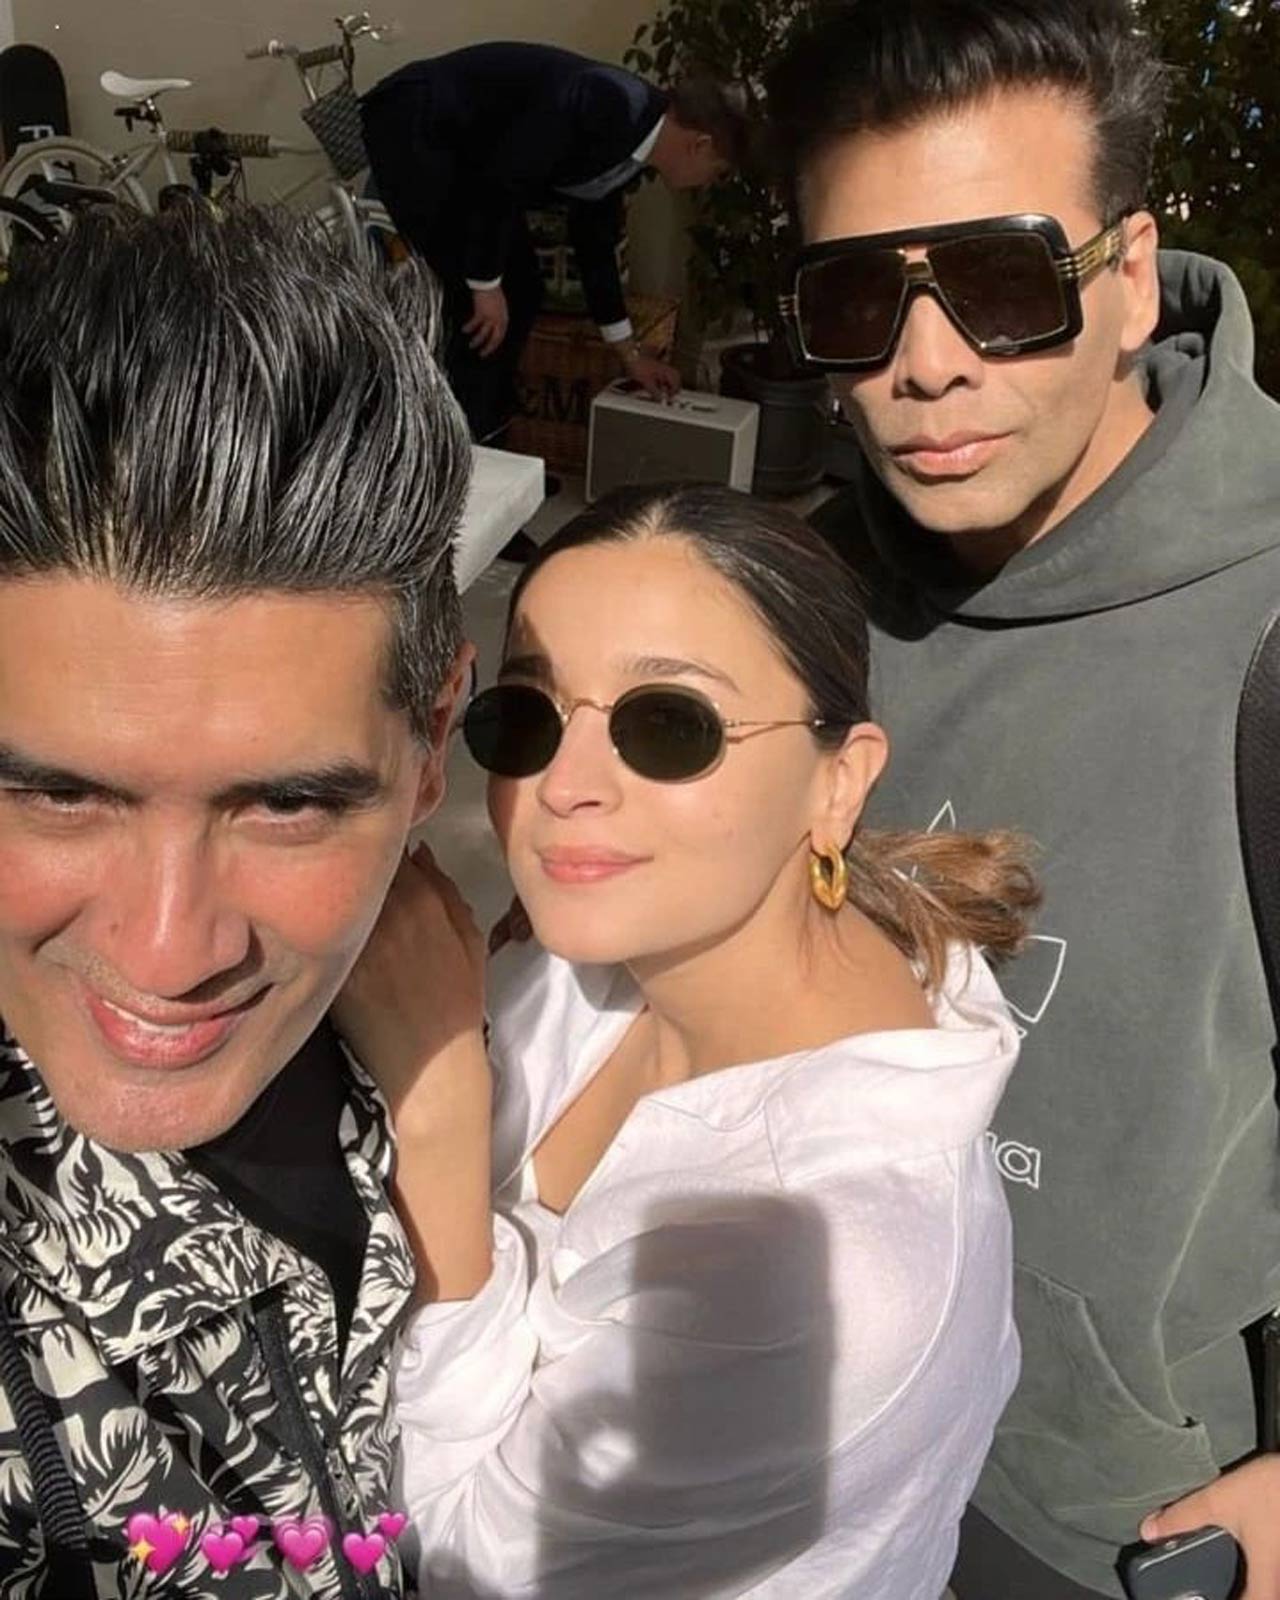 Alia Bhatt, Karan Johar, Manish Malhotra also shared a picture together, or rather a selfie. From the series of glimpses, in one of the pictures Manish could be seen posing with mom-to-be Alia Bhatt and Karan Johar, he captioned the image, 